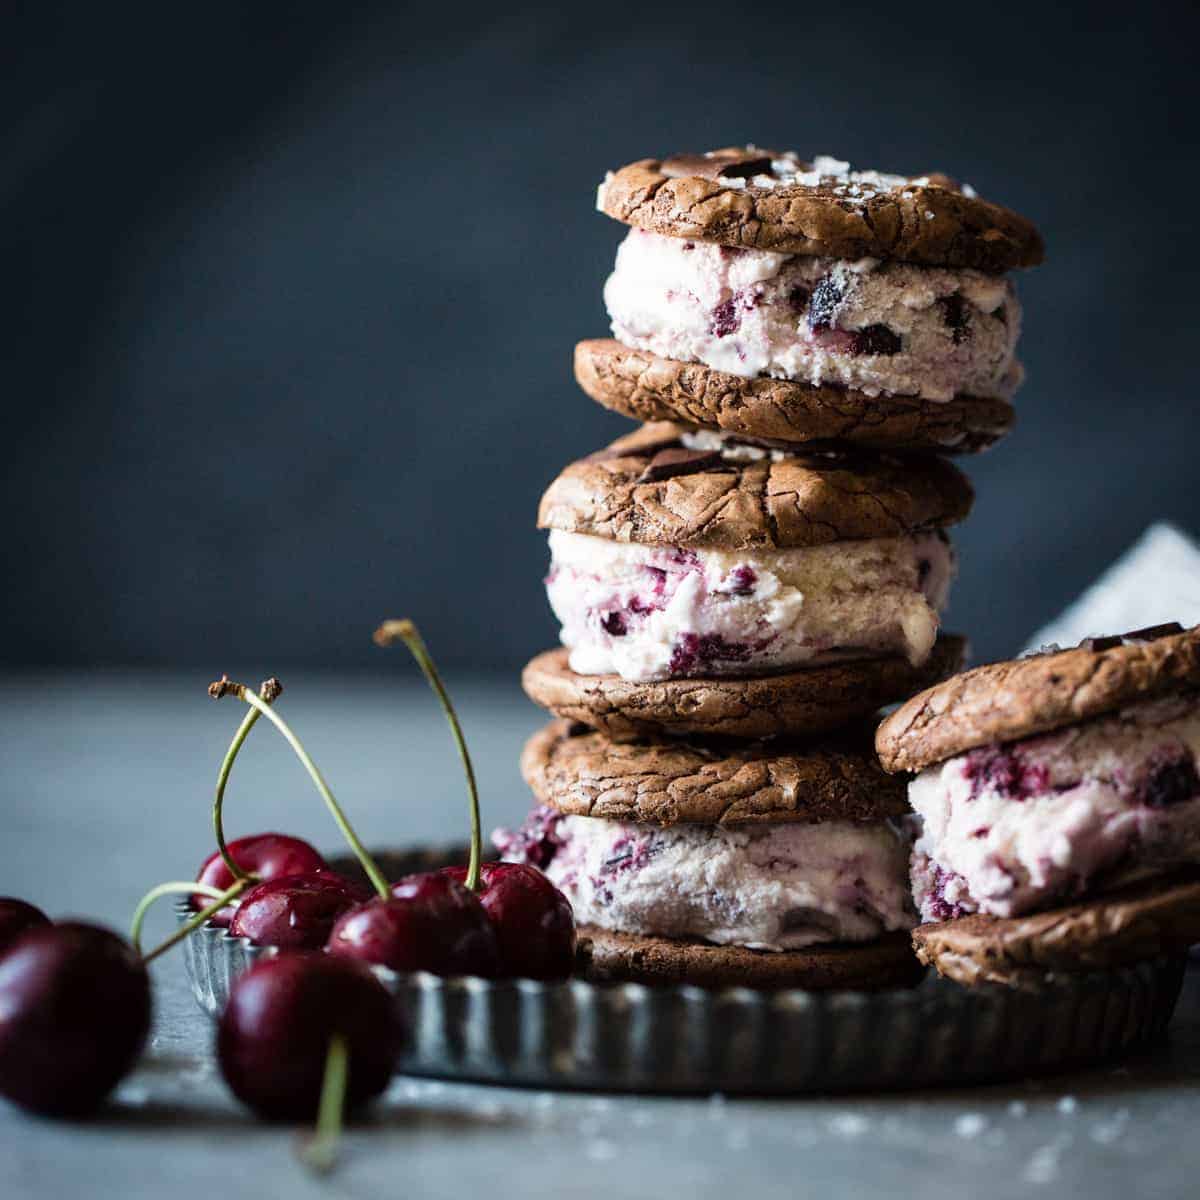 delicious Roasted Cherry Ice Cream Sandwiches with Salted Double Chocolate Buckwheat Cookies {gluten-free}